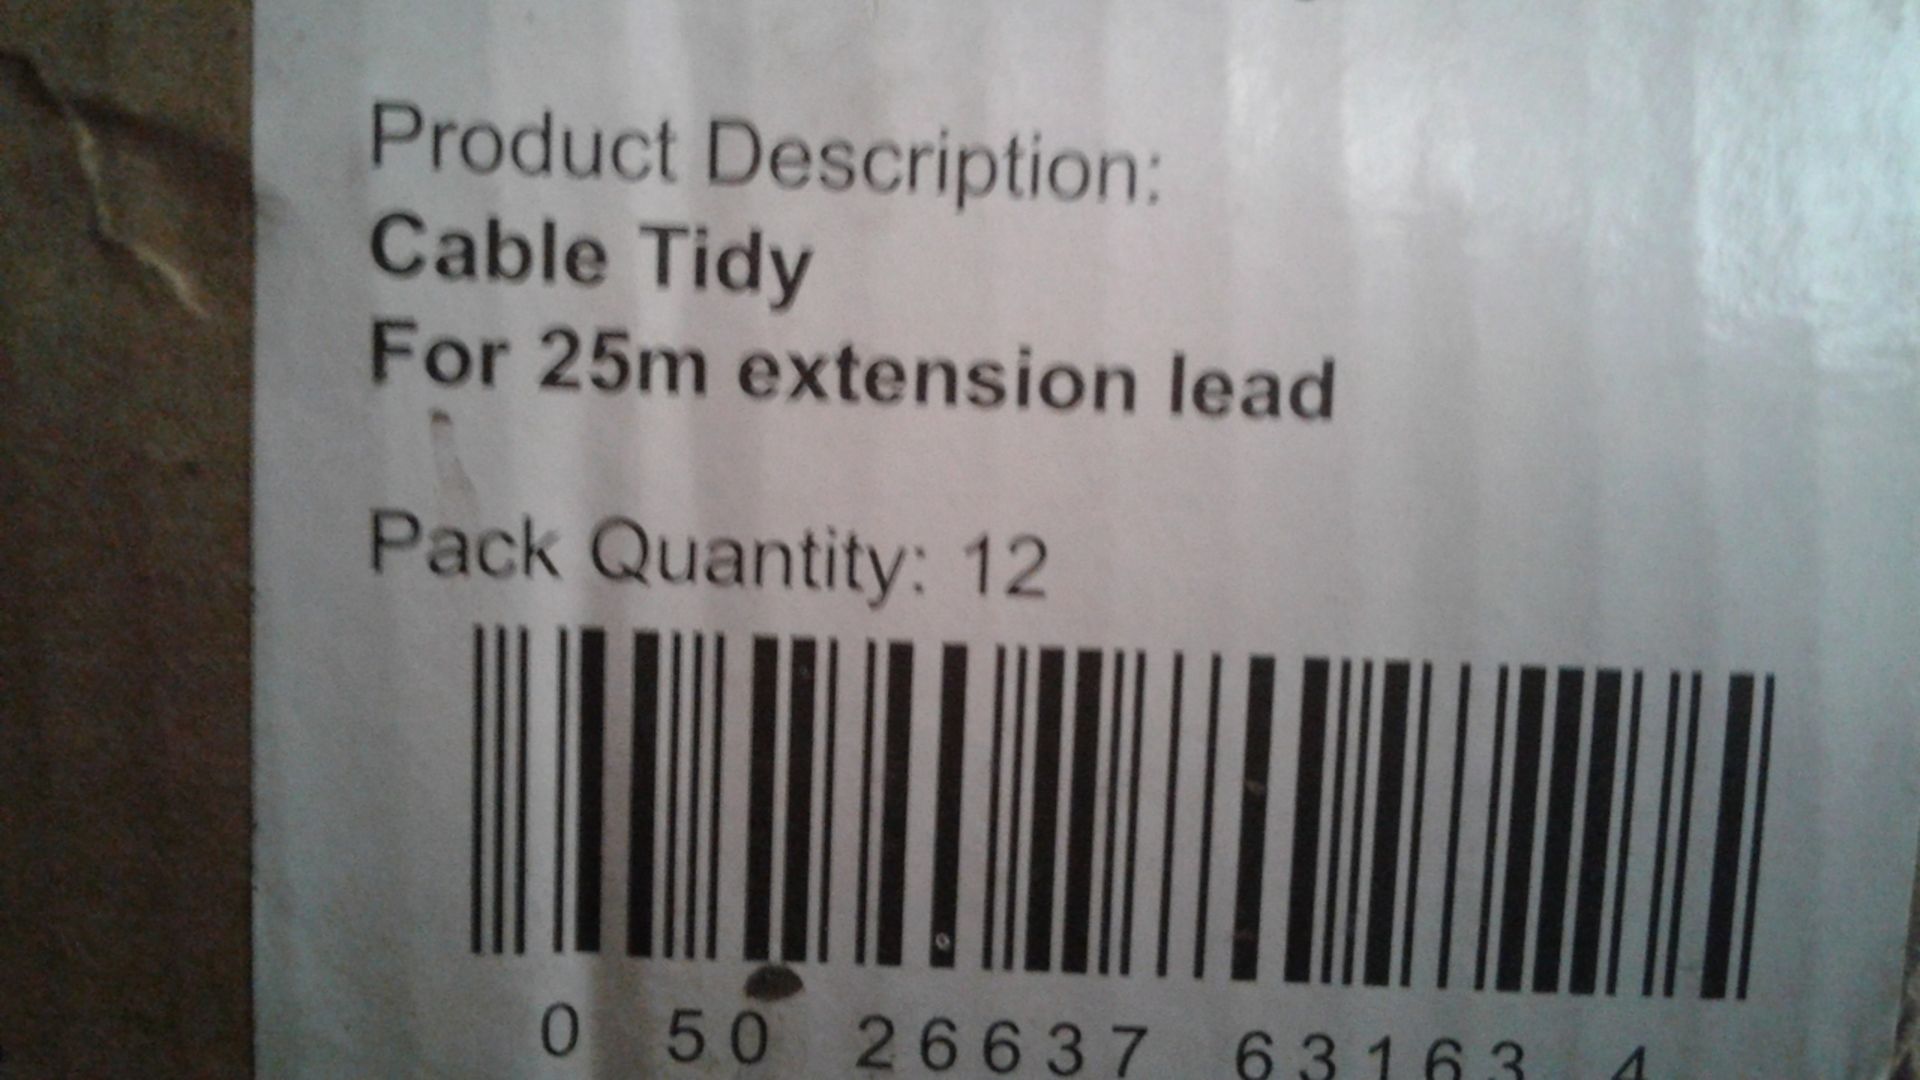 12pcs X Brand new unused 25 Metre cable tidy - 12 in carton - Image 2 of 2